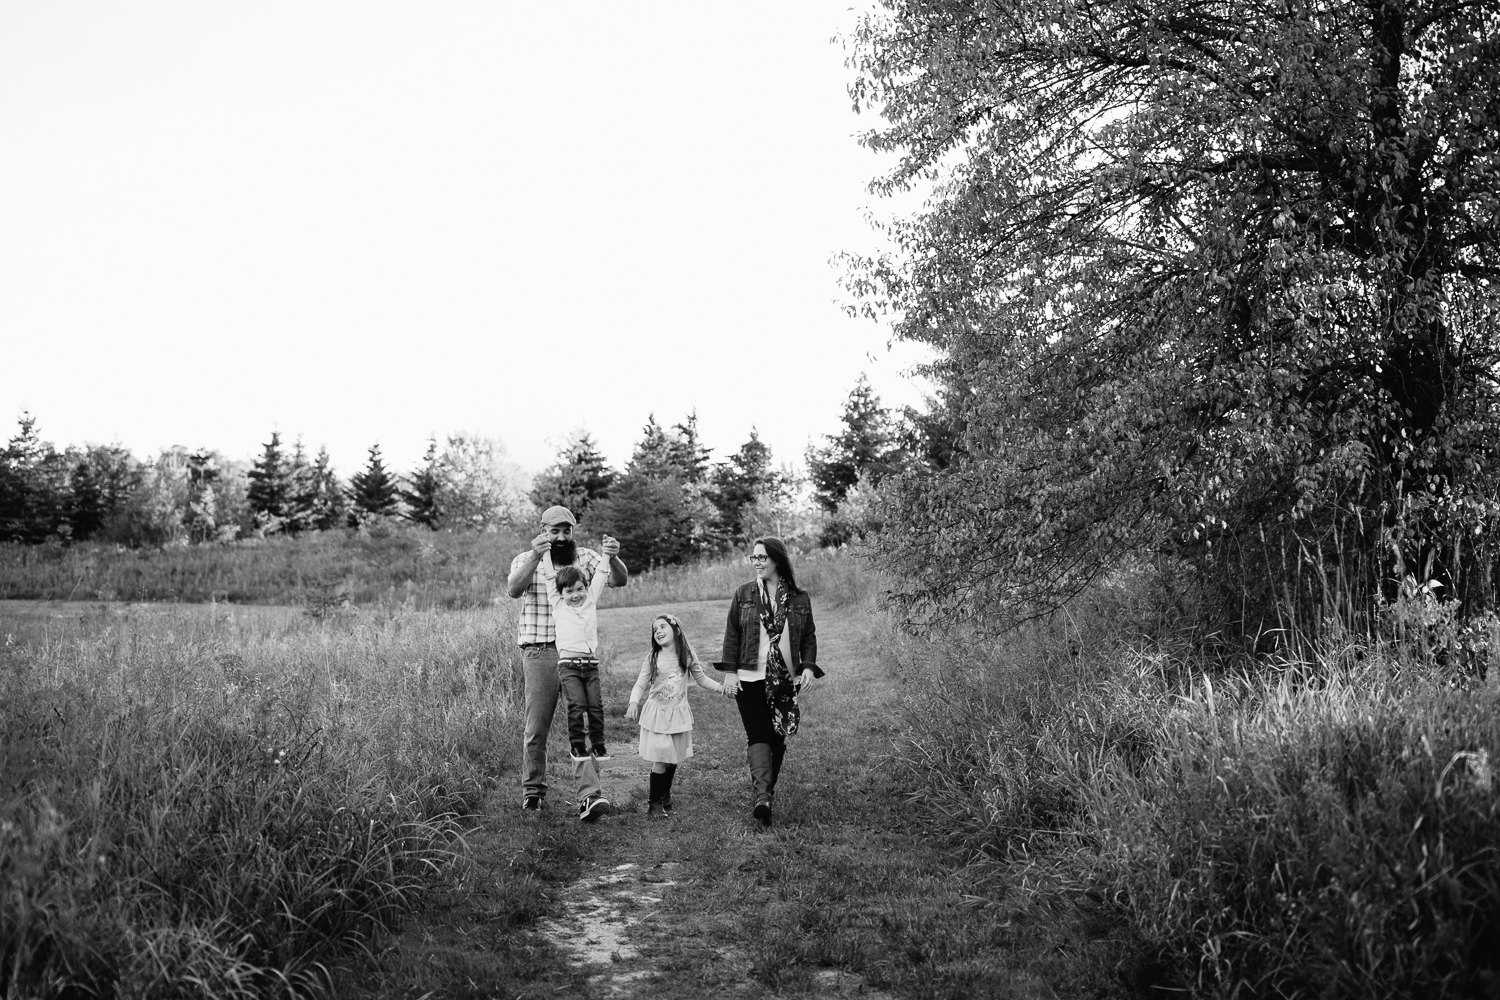 family of 4 holding hands, walking down path in grassy field, dad swinging son by both arms, mother and daughter smiling at them - GTA Lifestyle Photos